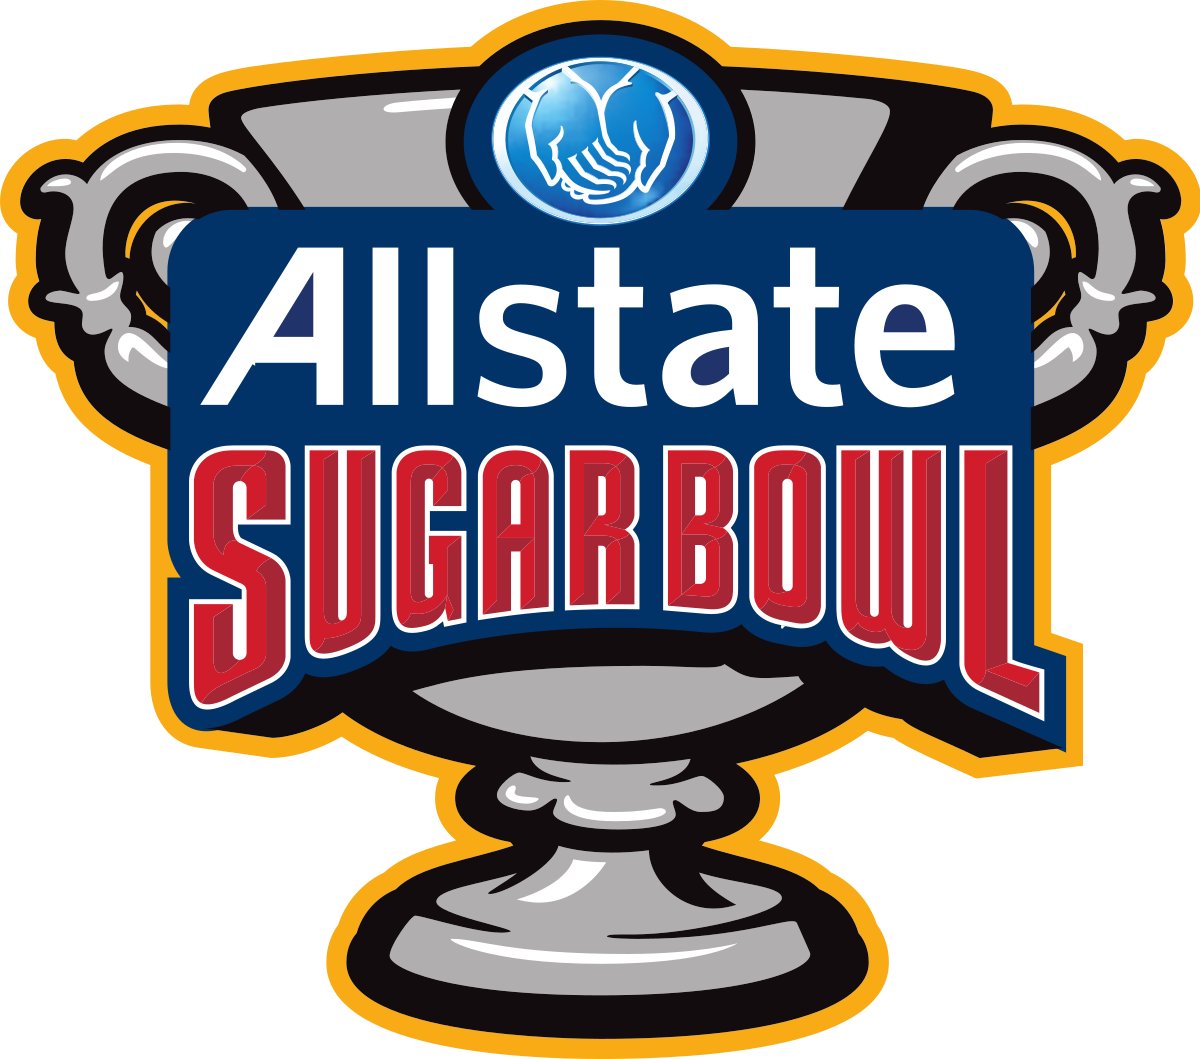 Sugar Bowl 2021 Live Stream Anywhere with Help of VPN Service